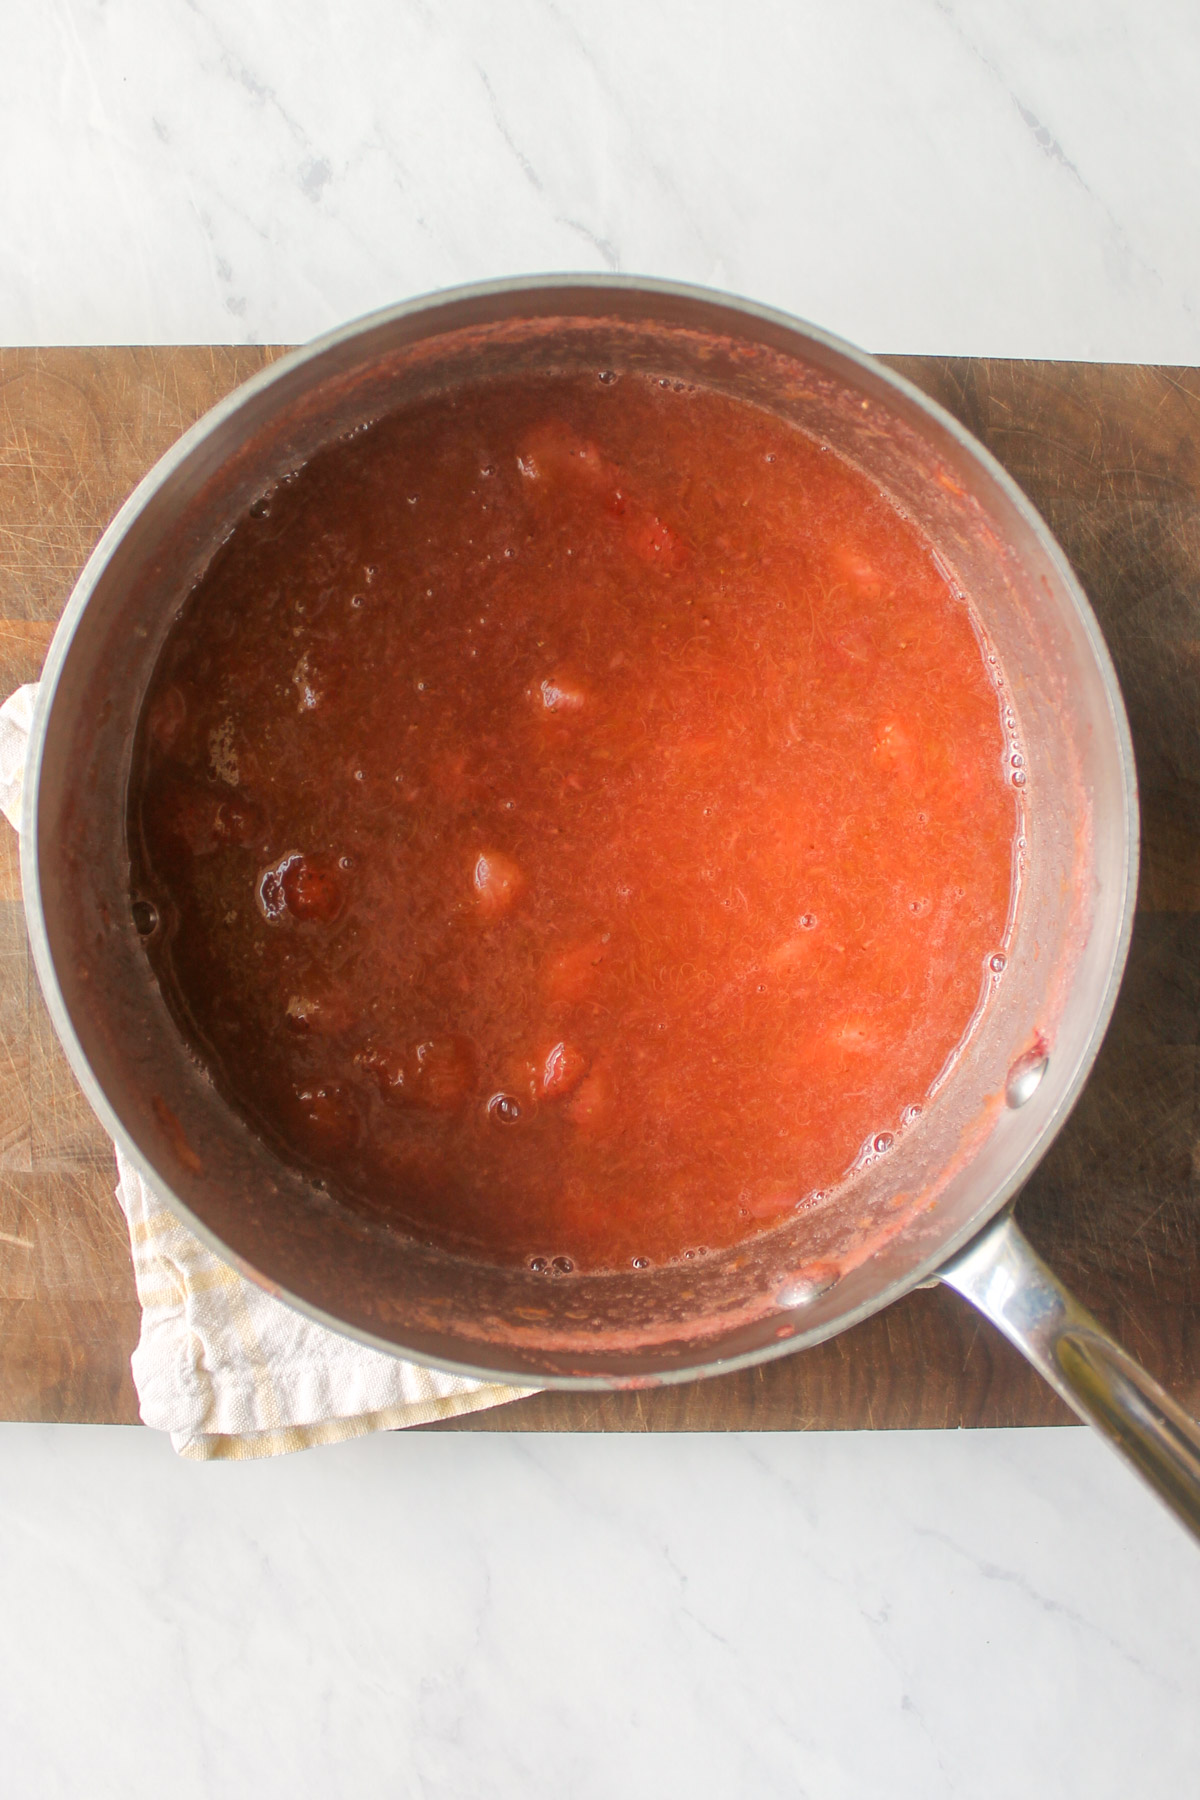 The cooked strawberry rhubarb sauce in a pot, ready to be blended.